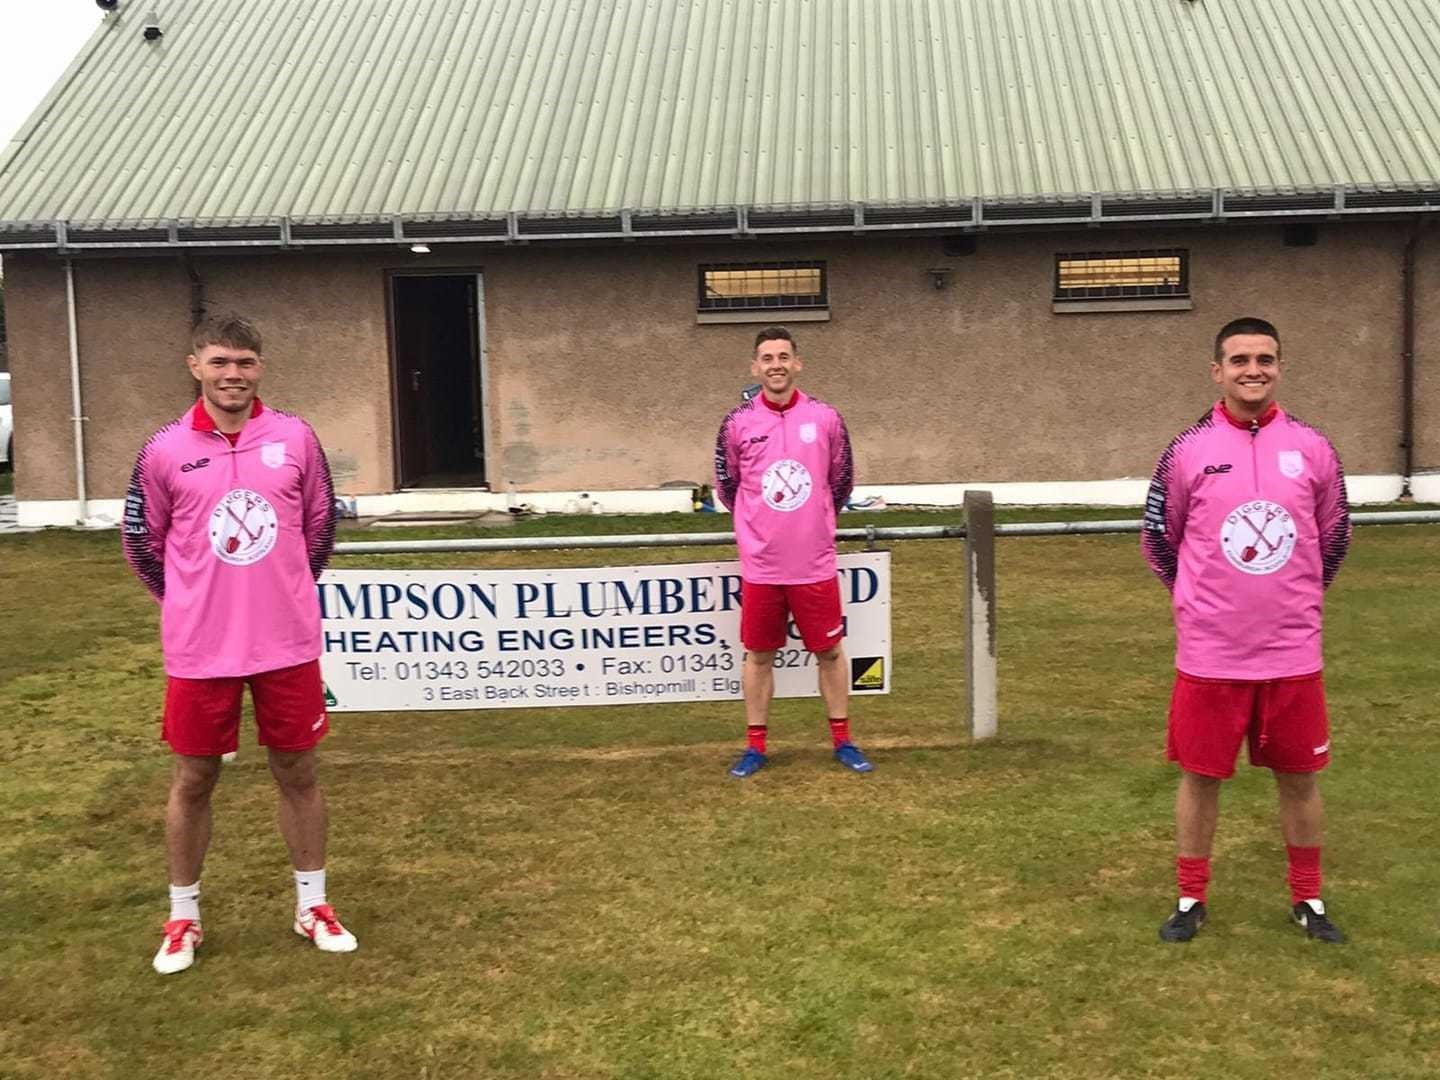 Forres Thistle players receive new training kits from Mental Mechanics after their efforts in a recent hour-long run. Left to right: Ross Paterson, Neil Moir and Danny Black try on their new kits.